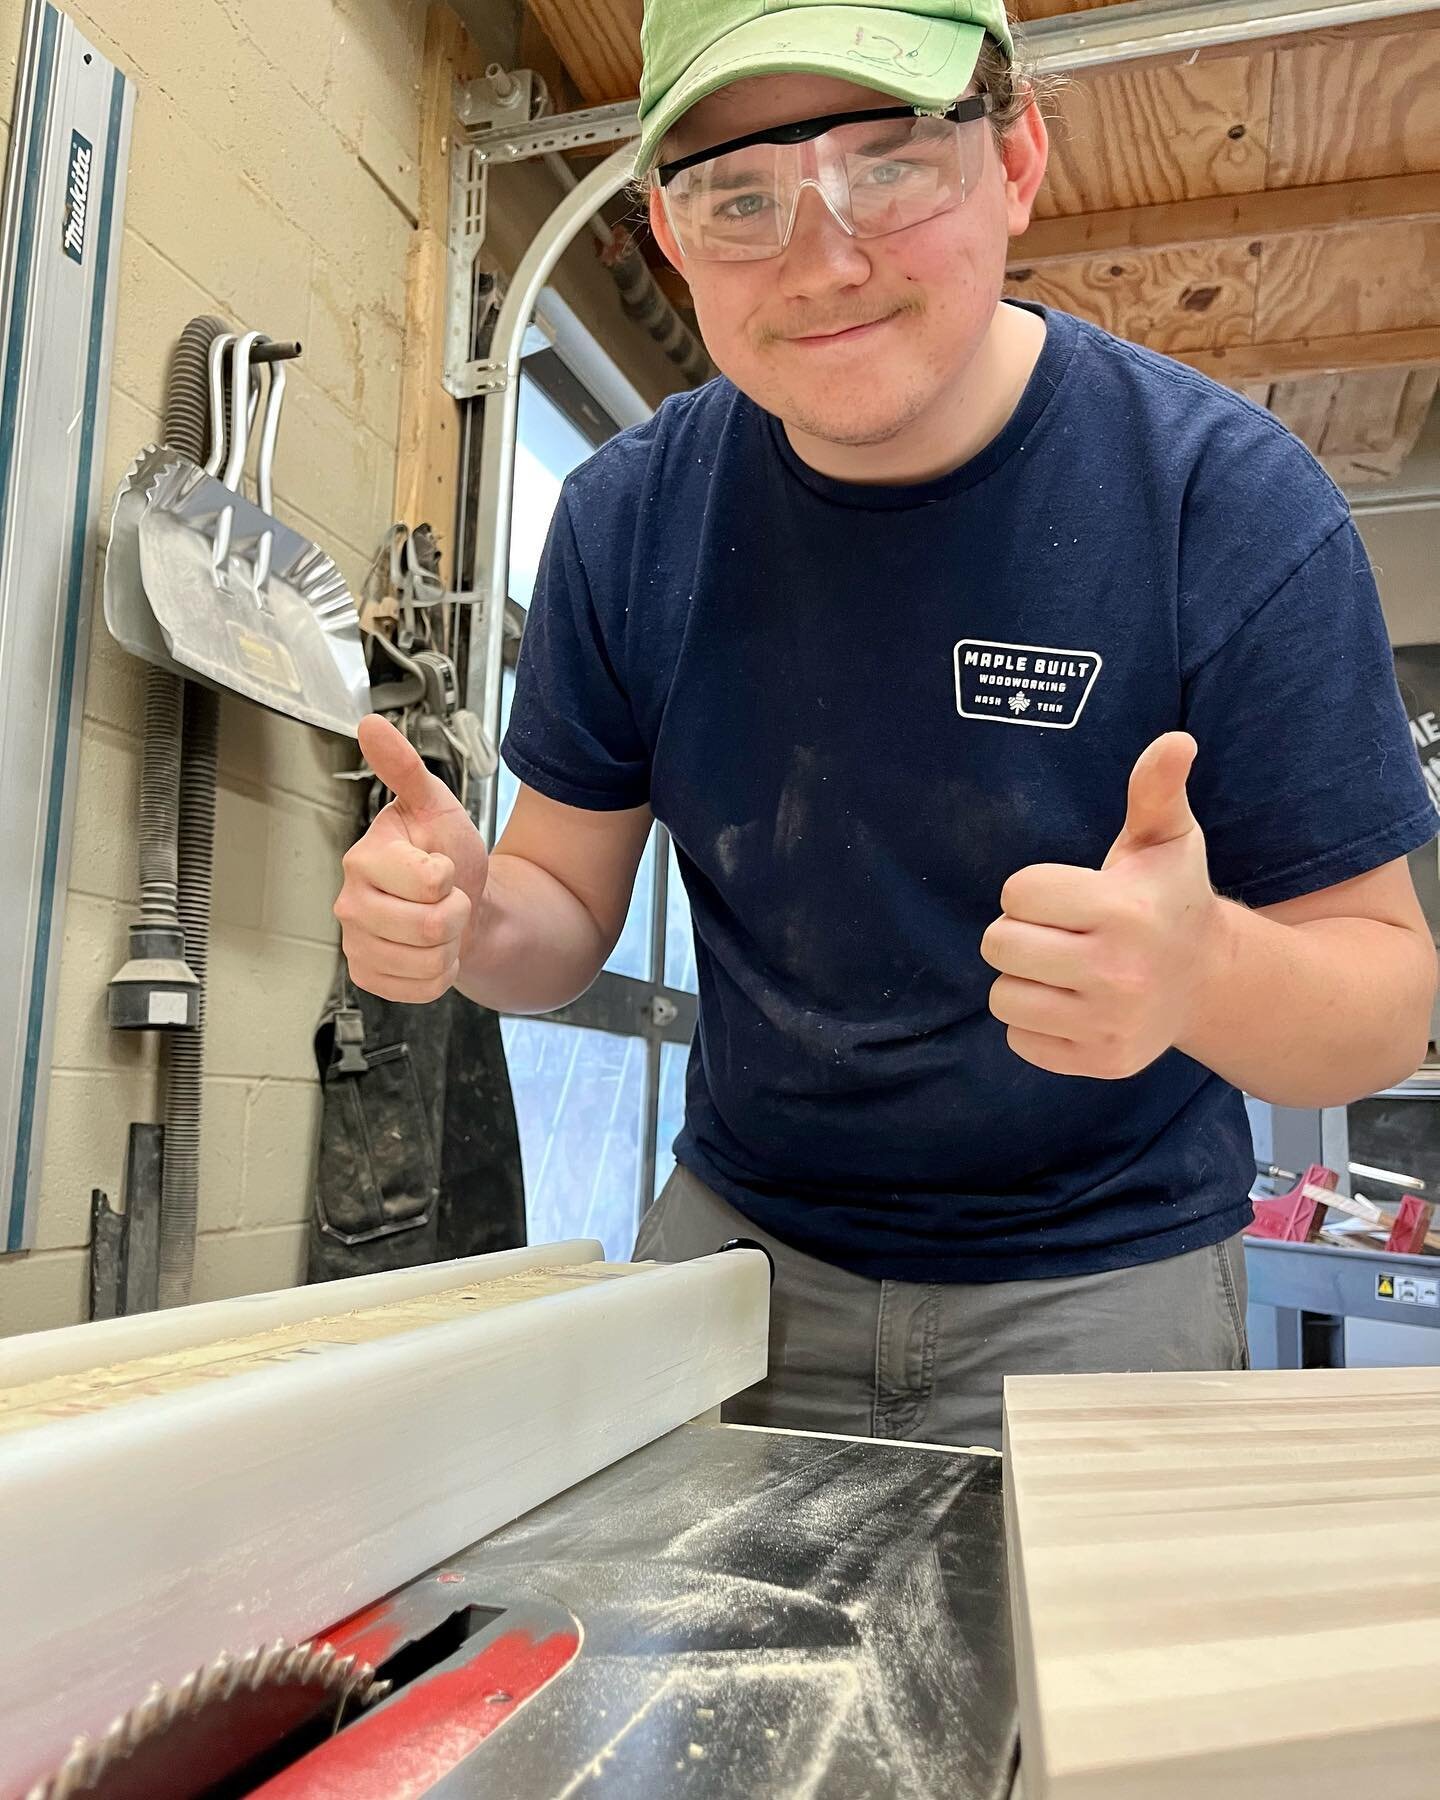 Henry is excited about the current project in the shop! More to come soon! #EmployTrainMentor